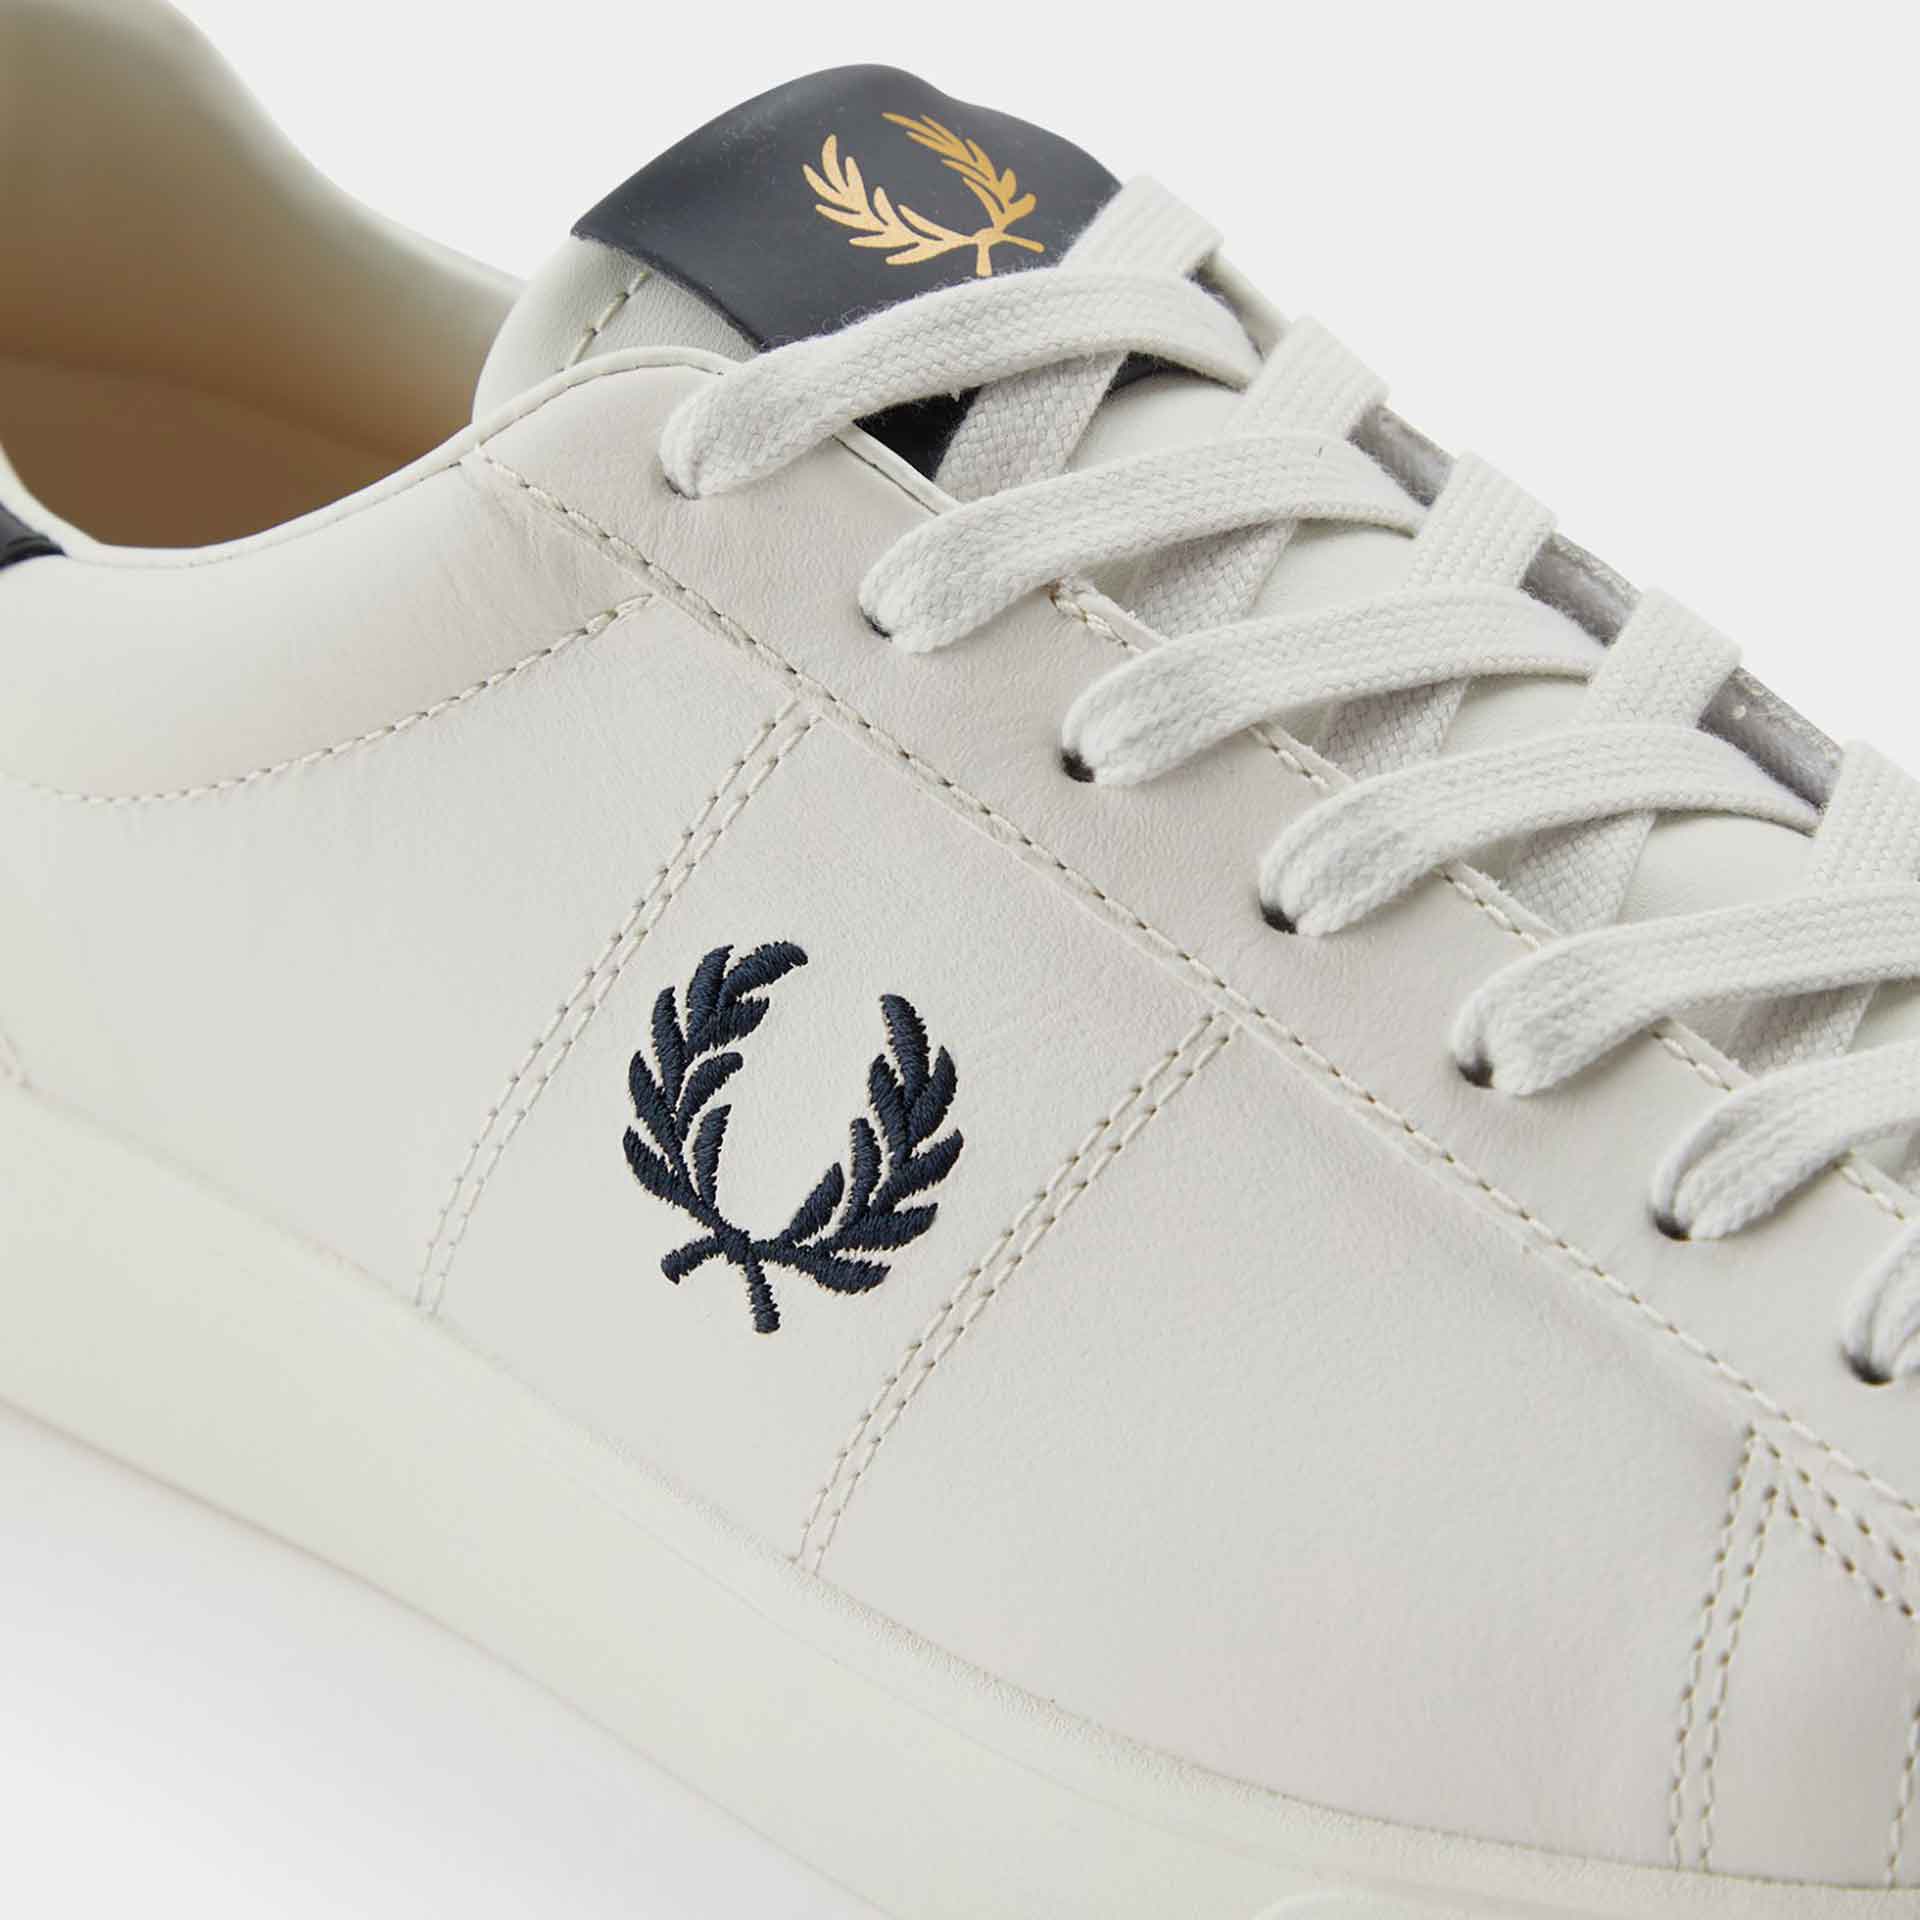 Fred Perry Spencer Leather Sneaker Porcelain